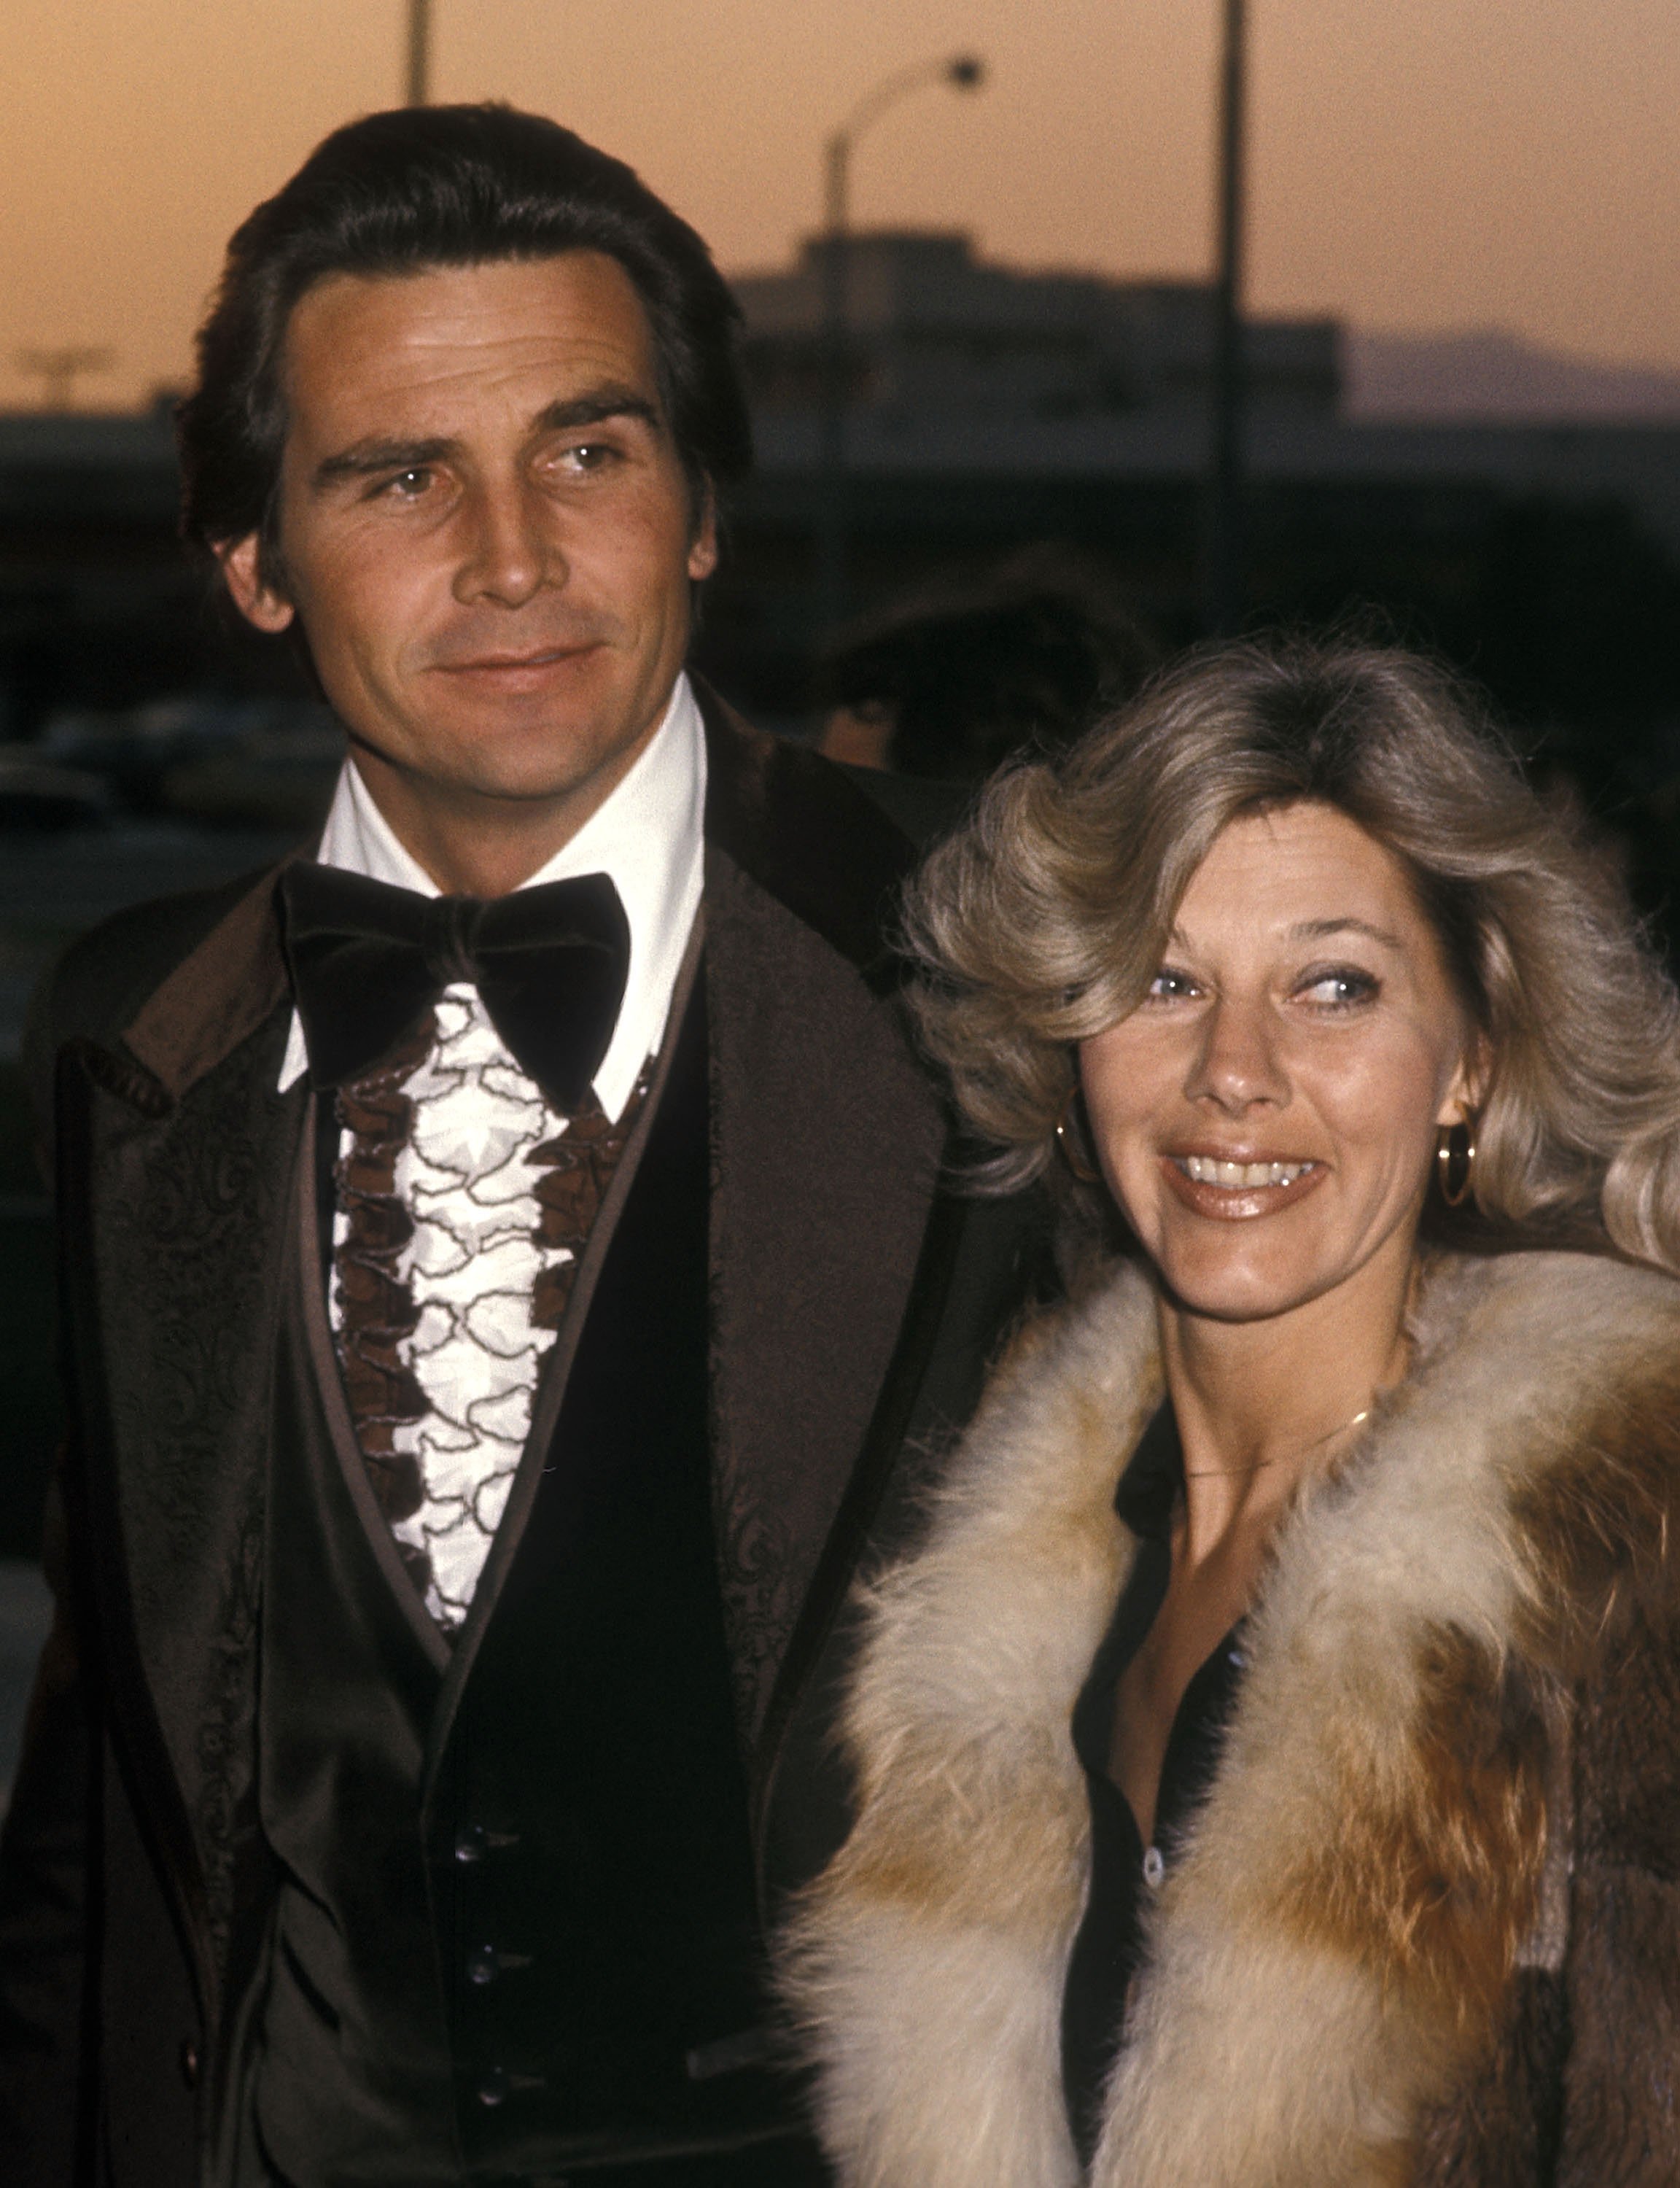 James Brolin and Jane Cameron Agee at the Second Annual People's Choice Awards on February 19, 1976, in Santa Monica, California. | Source: Getty Images